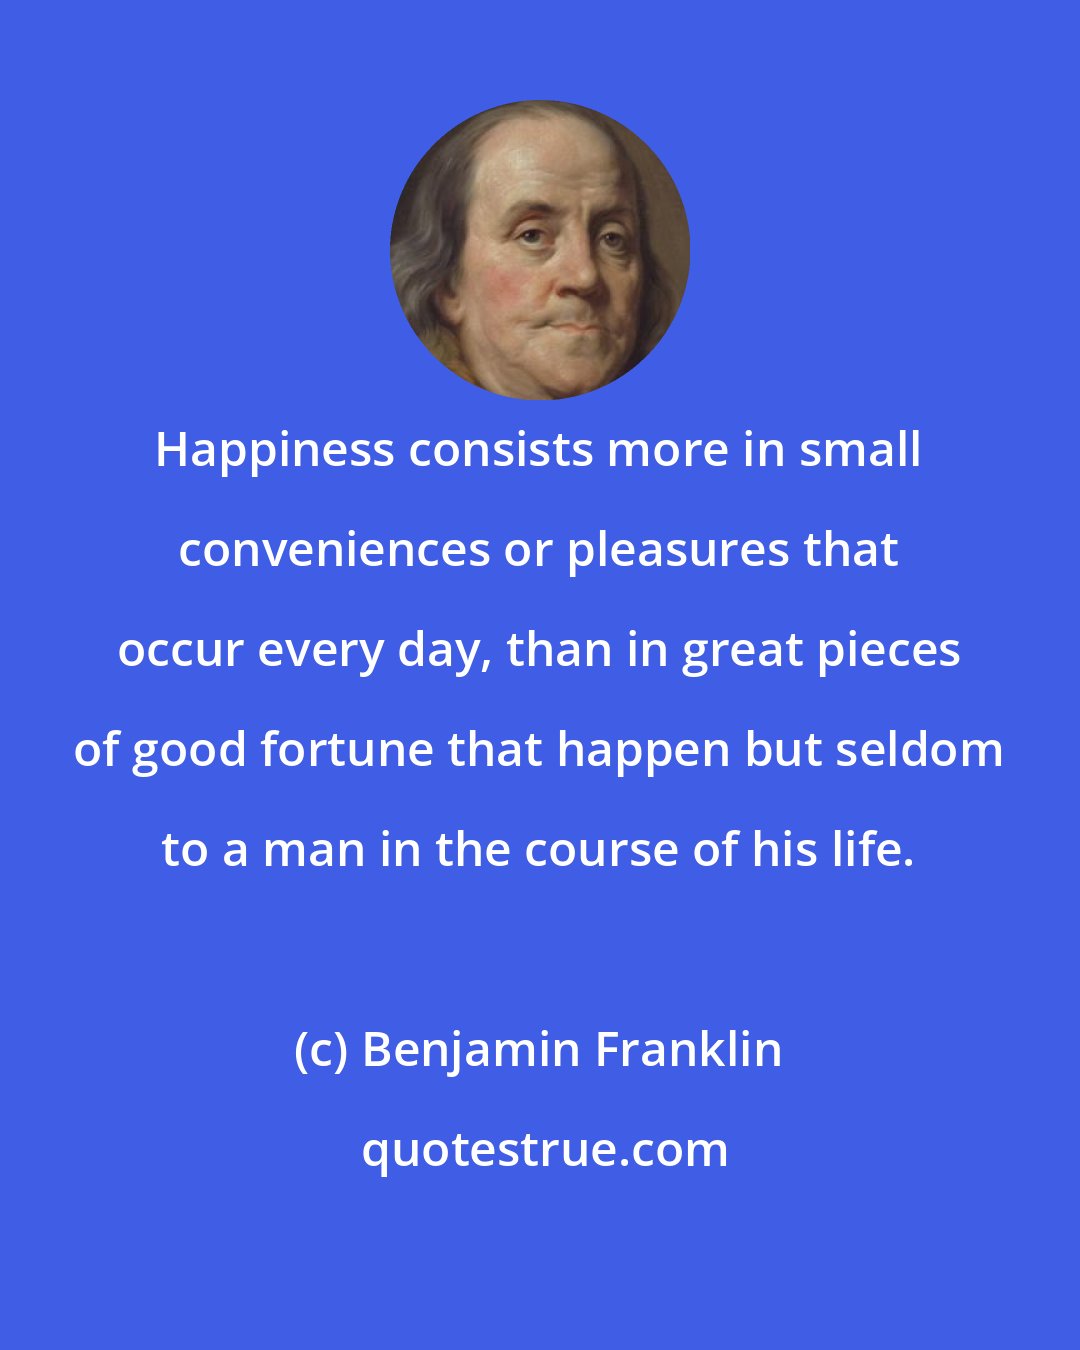 Benjamin Franklin: Happiness consists more in small conveniences or pleasures that occur every day, than in great pieces of good fortune that happen but seldom to a man in the course of his life.